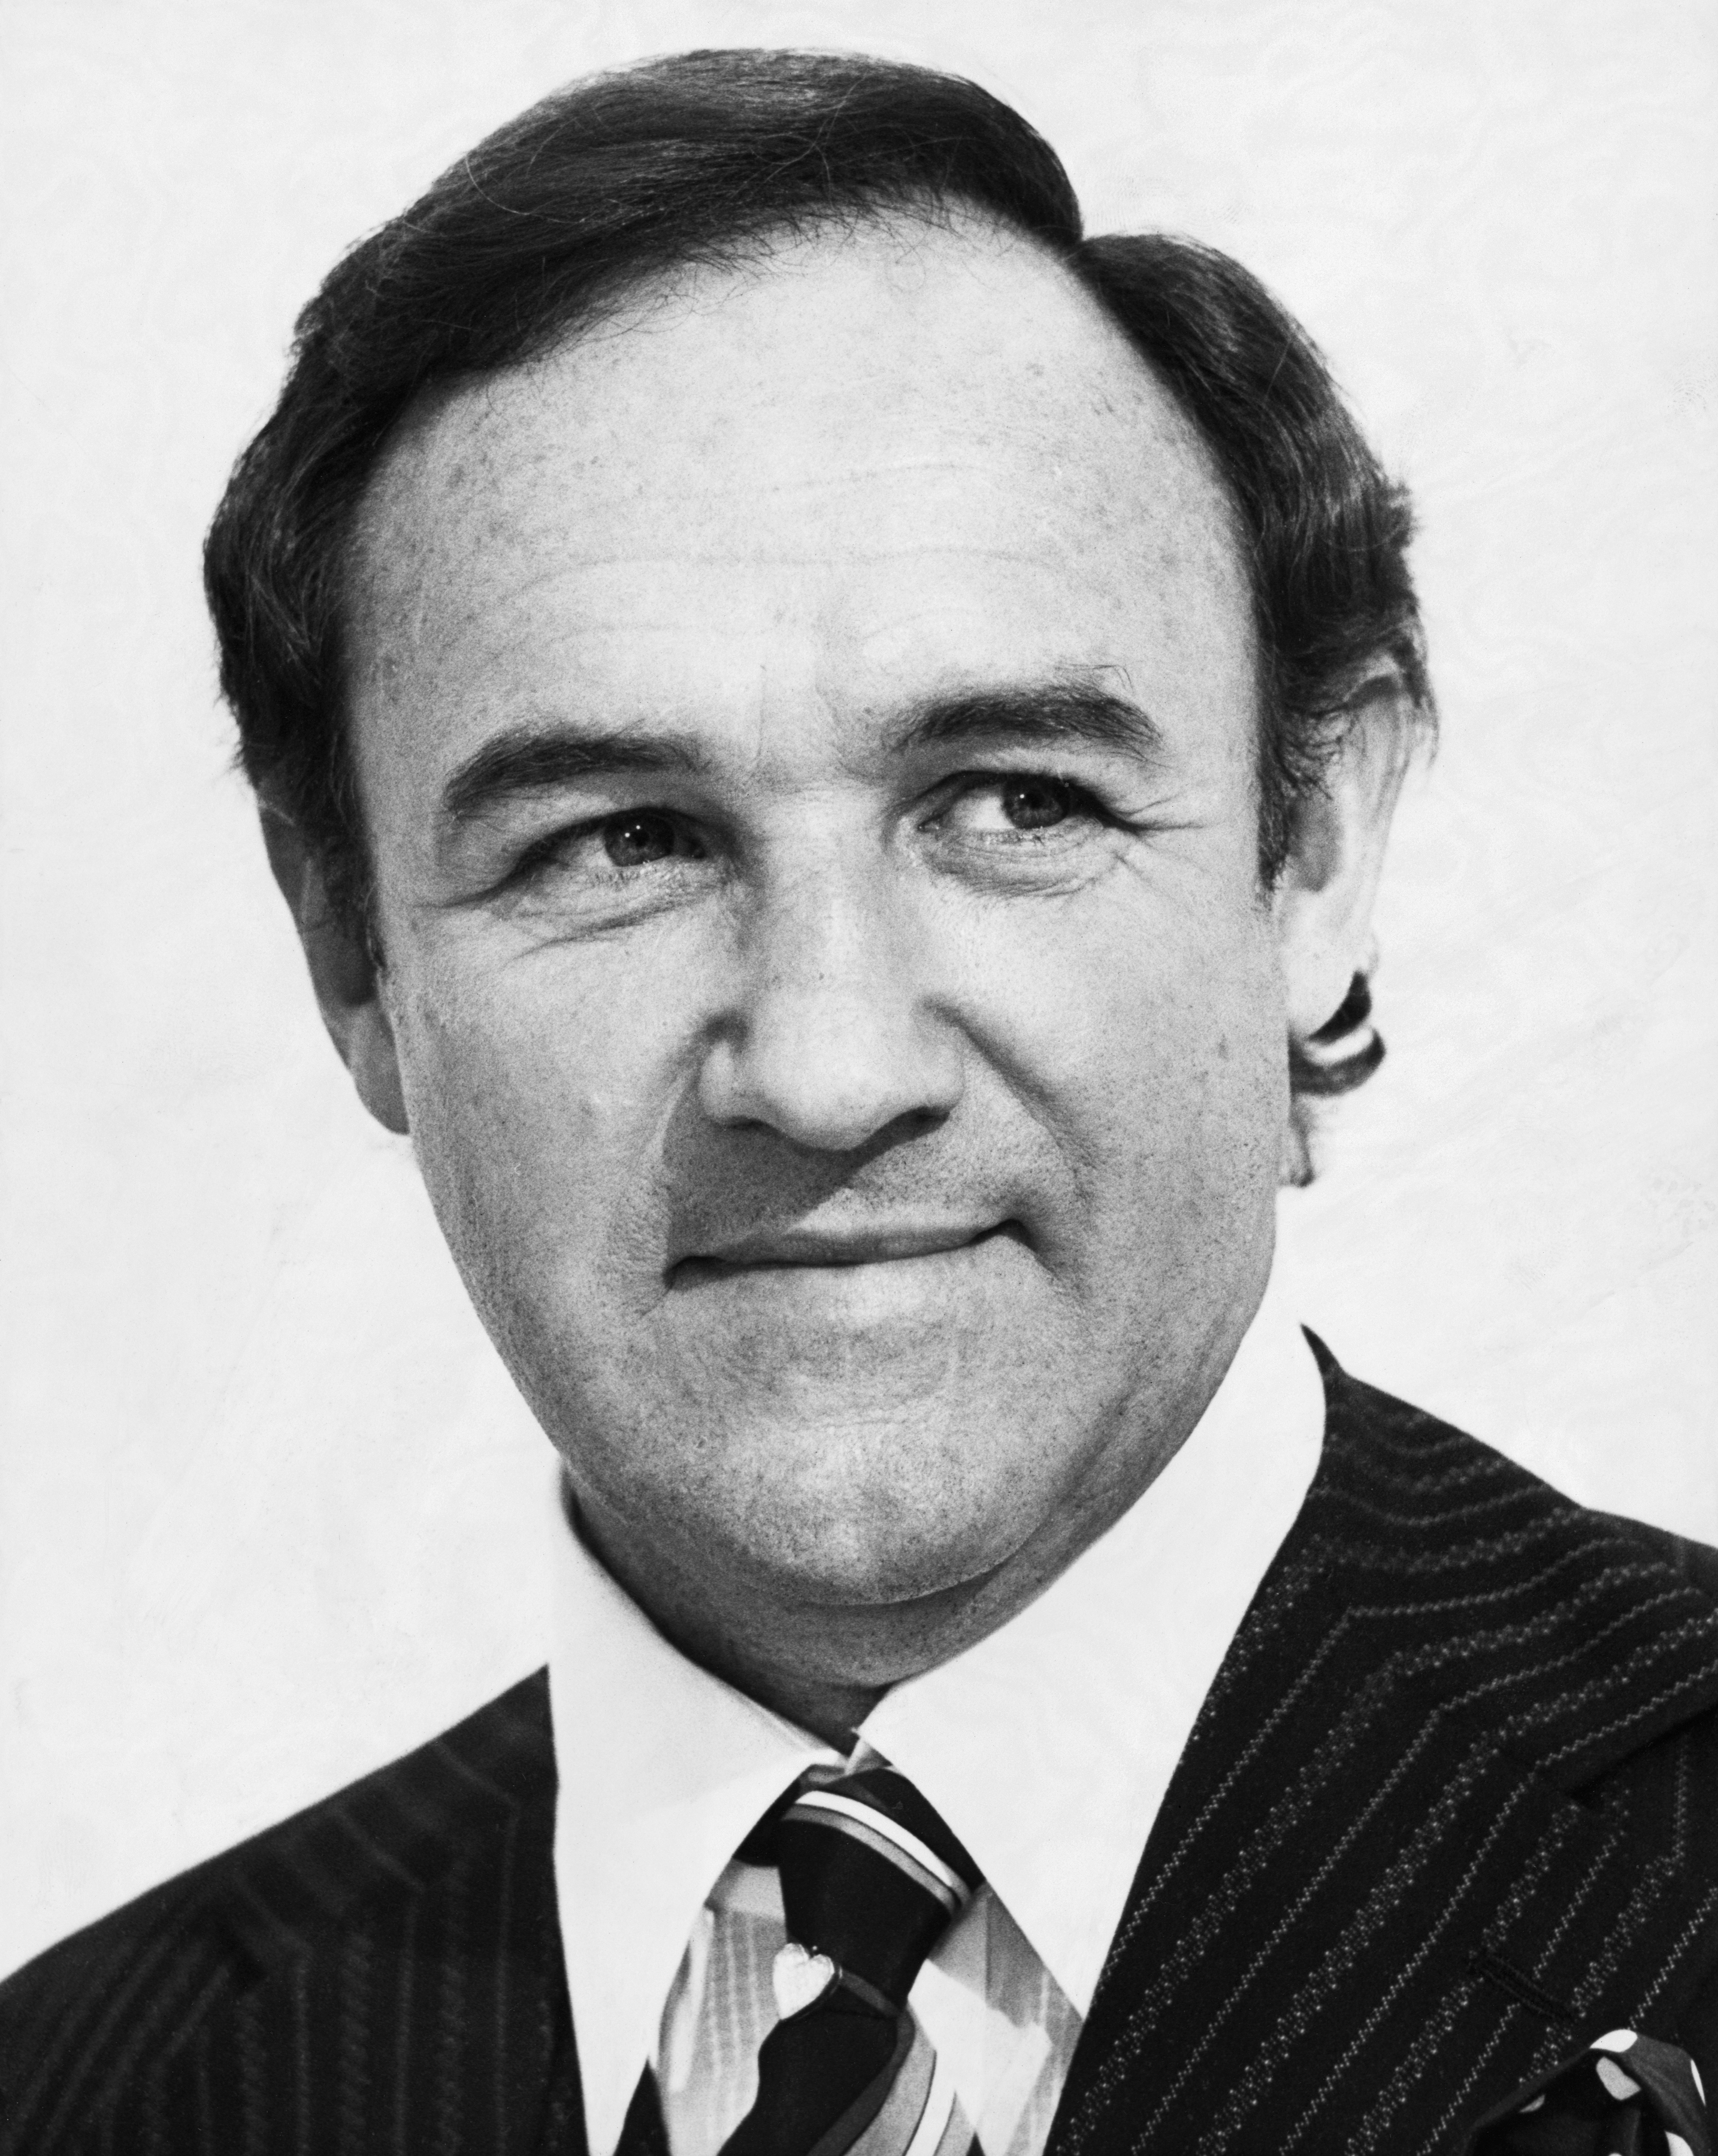 Gene Hackman playing Lex Luthor in "Superman" in 1978 | Source: Getty Images